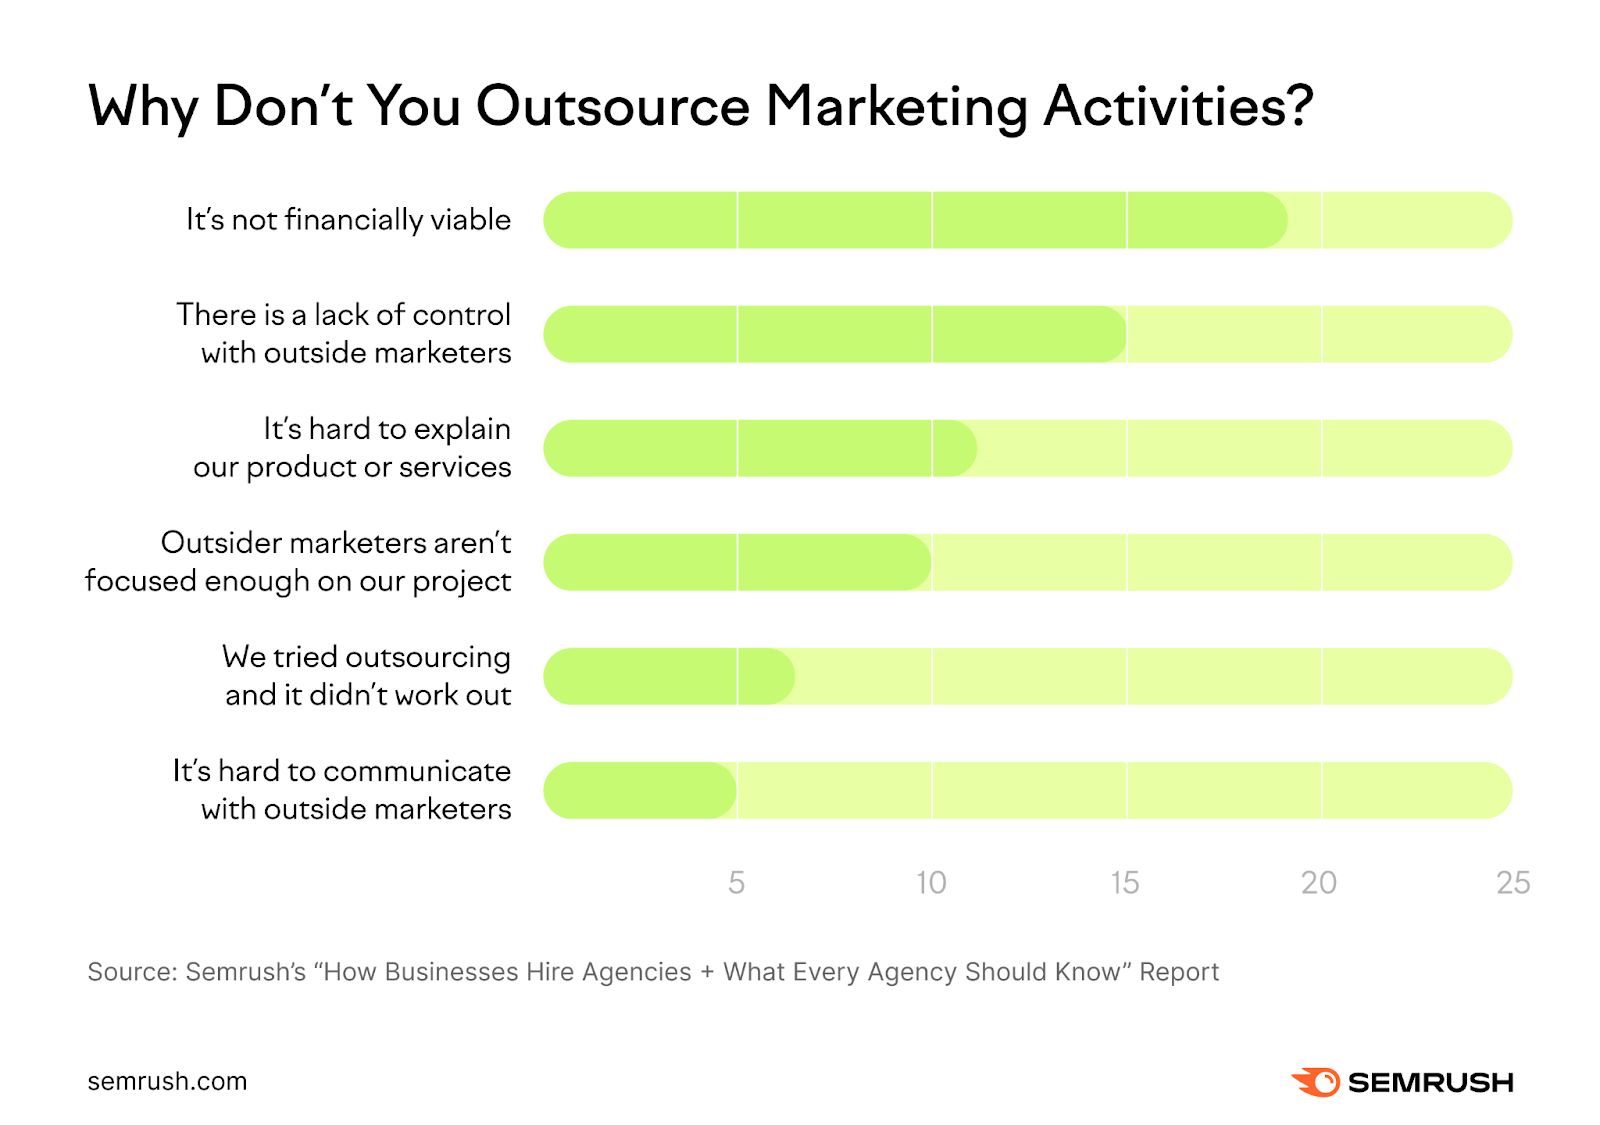 An infographic showing the results for "Why don't you outsource marketing activities?" question from the study